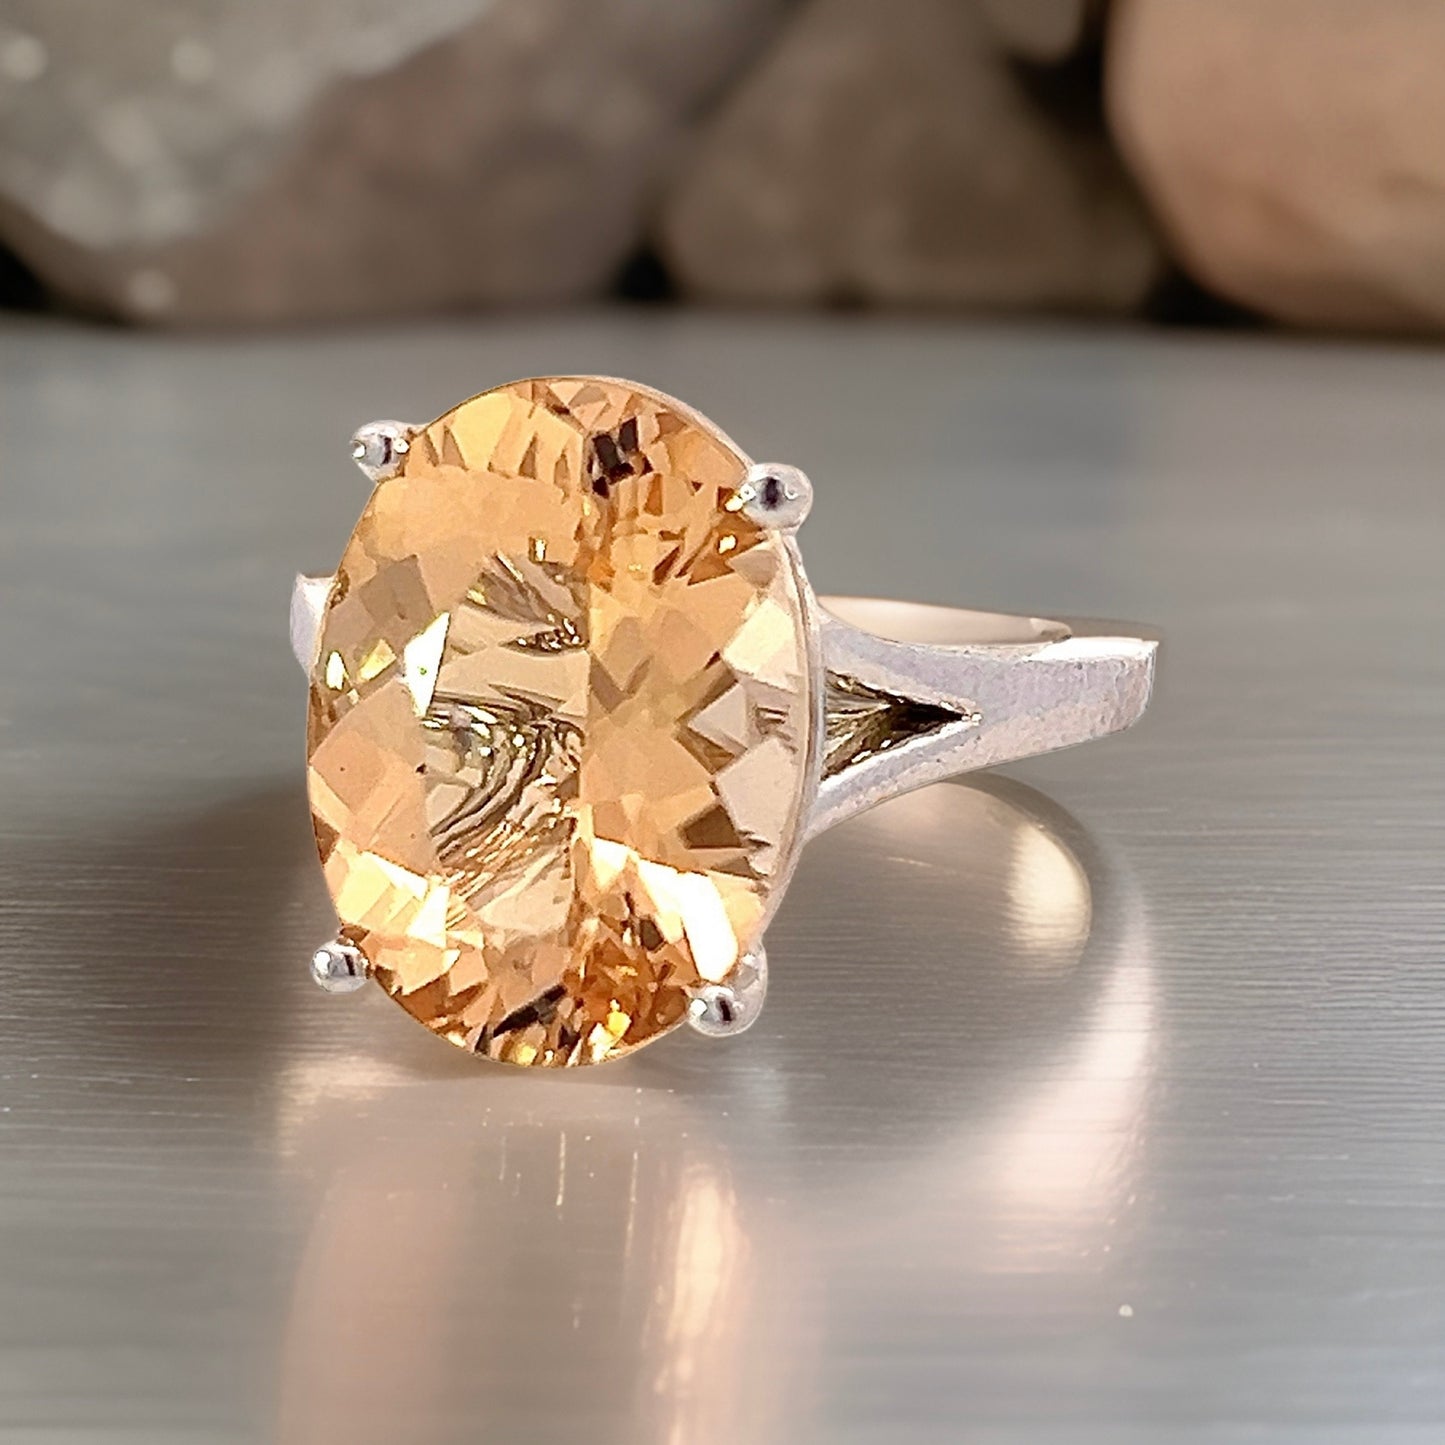 Natural Citrine Ring 6.5 14k W Gold 6.48 Cts Certified $3,950 310628